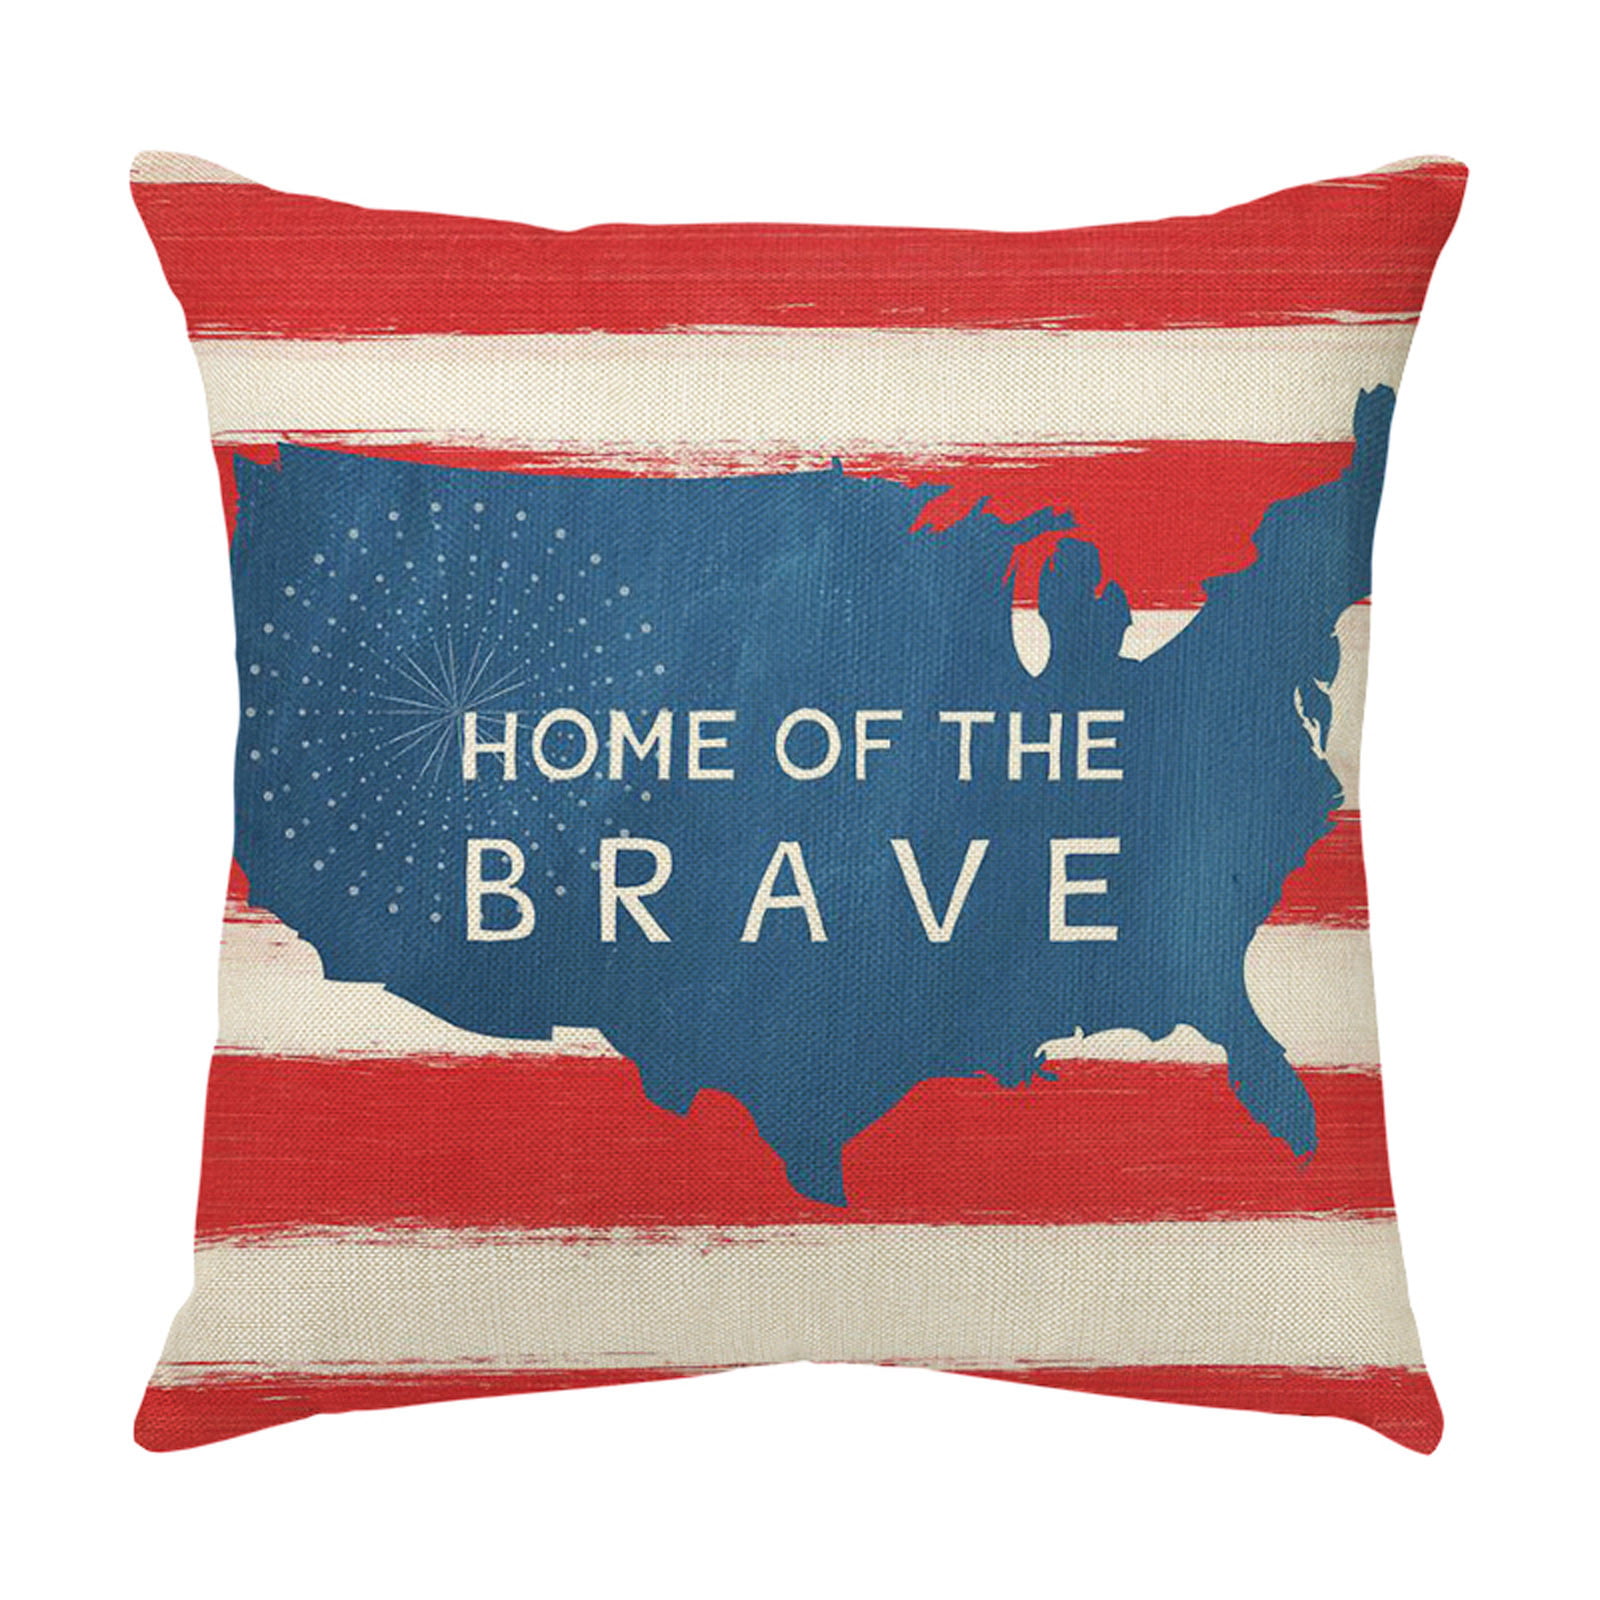 Independence Day Home Decorations 4th of July Decor Pillow 4th of July Decor Pillow Forth of July Decorations Home of the Brave Pillow